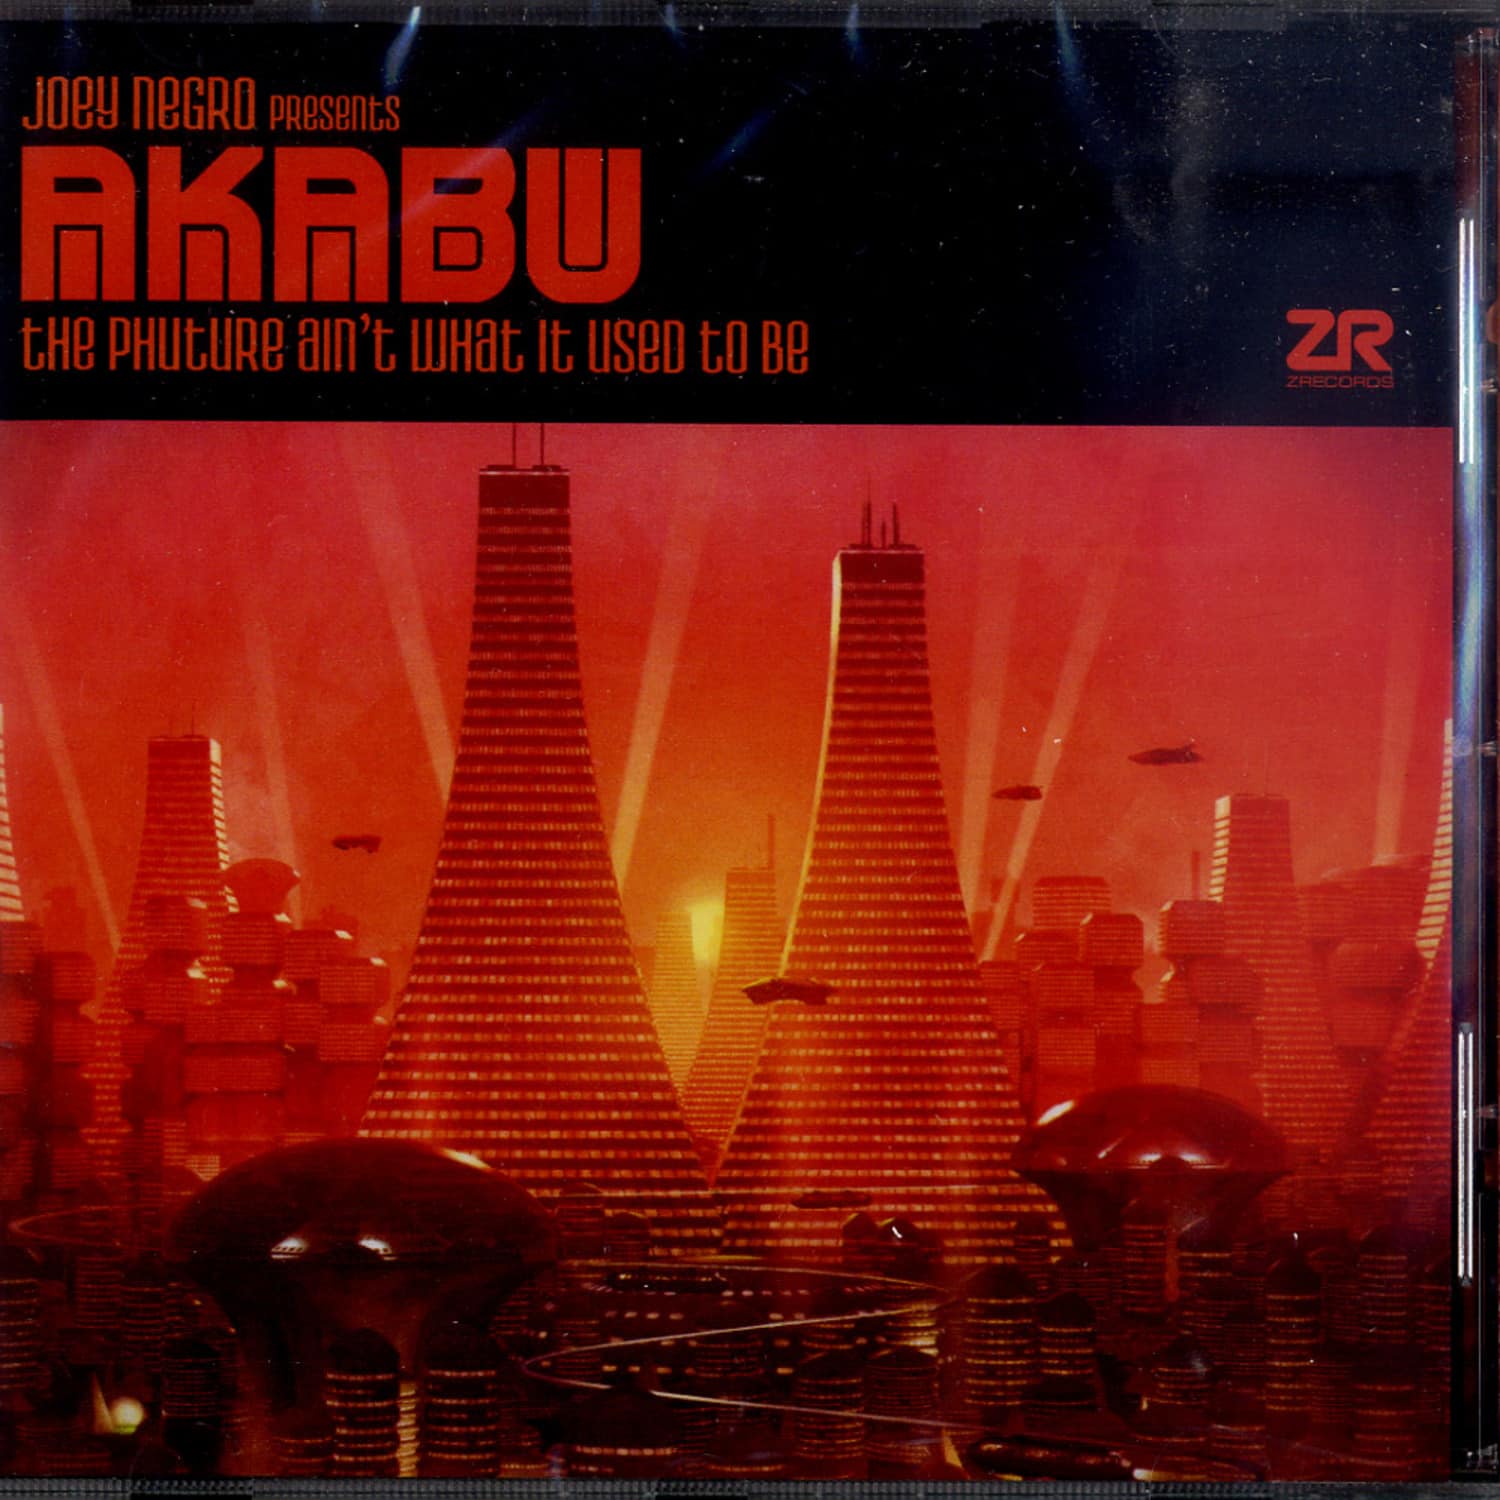 Joey Negro Presents Akabu - THE PHUTURE AINT WHAT IT USED TO BE 